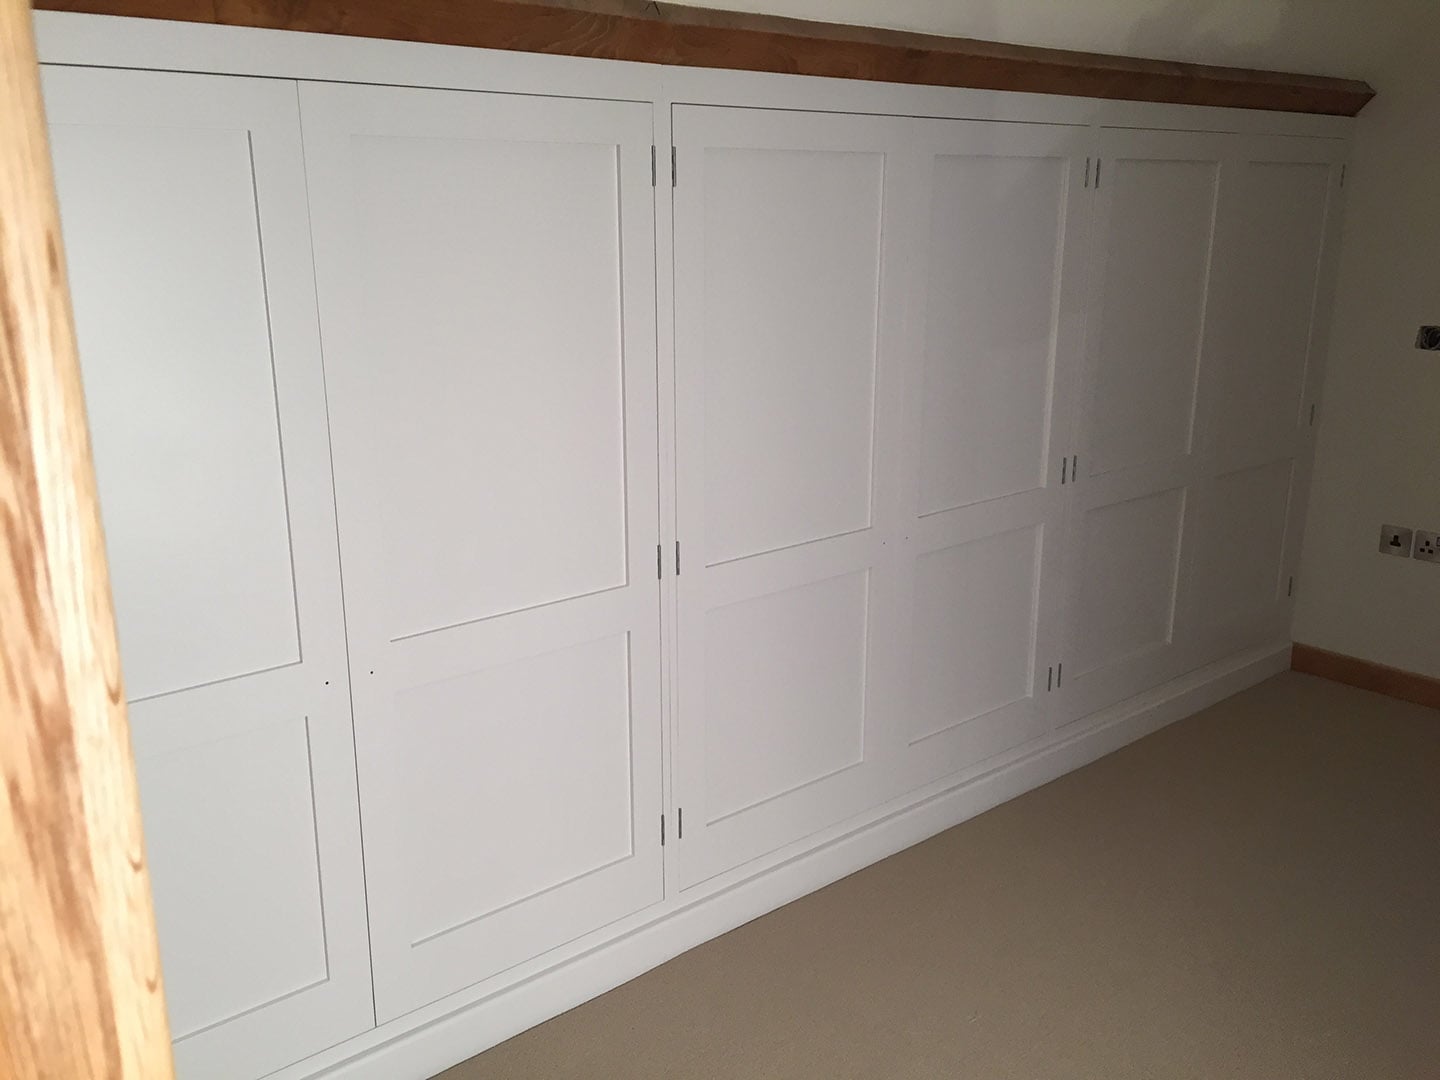 The front of a row of integrated wardrobes.